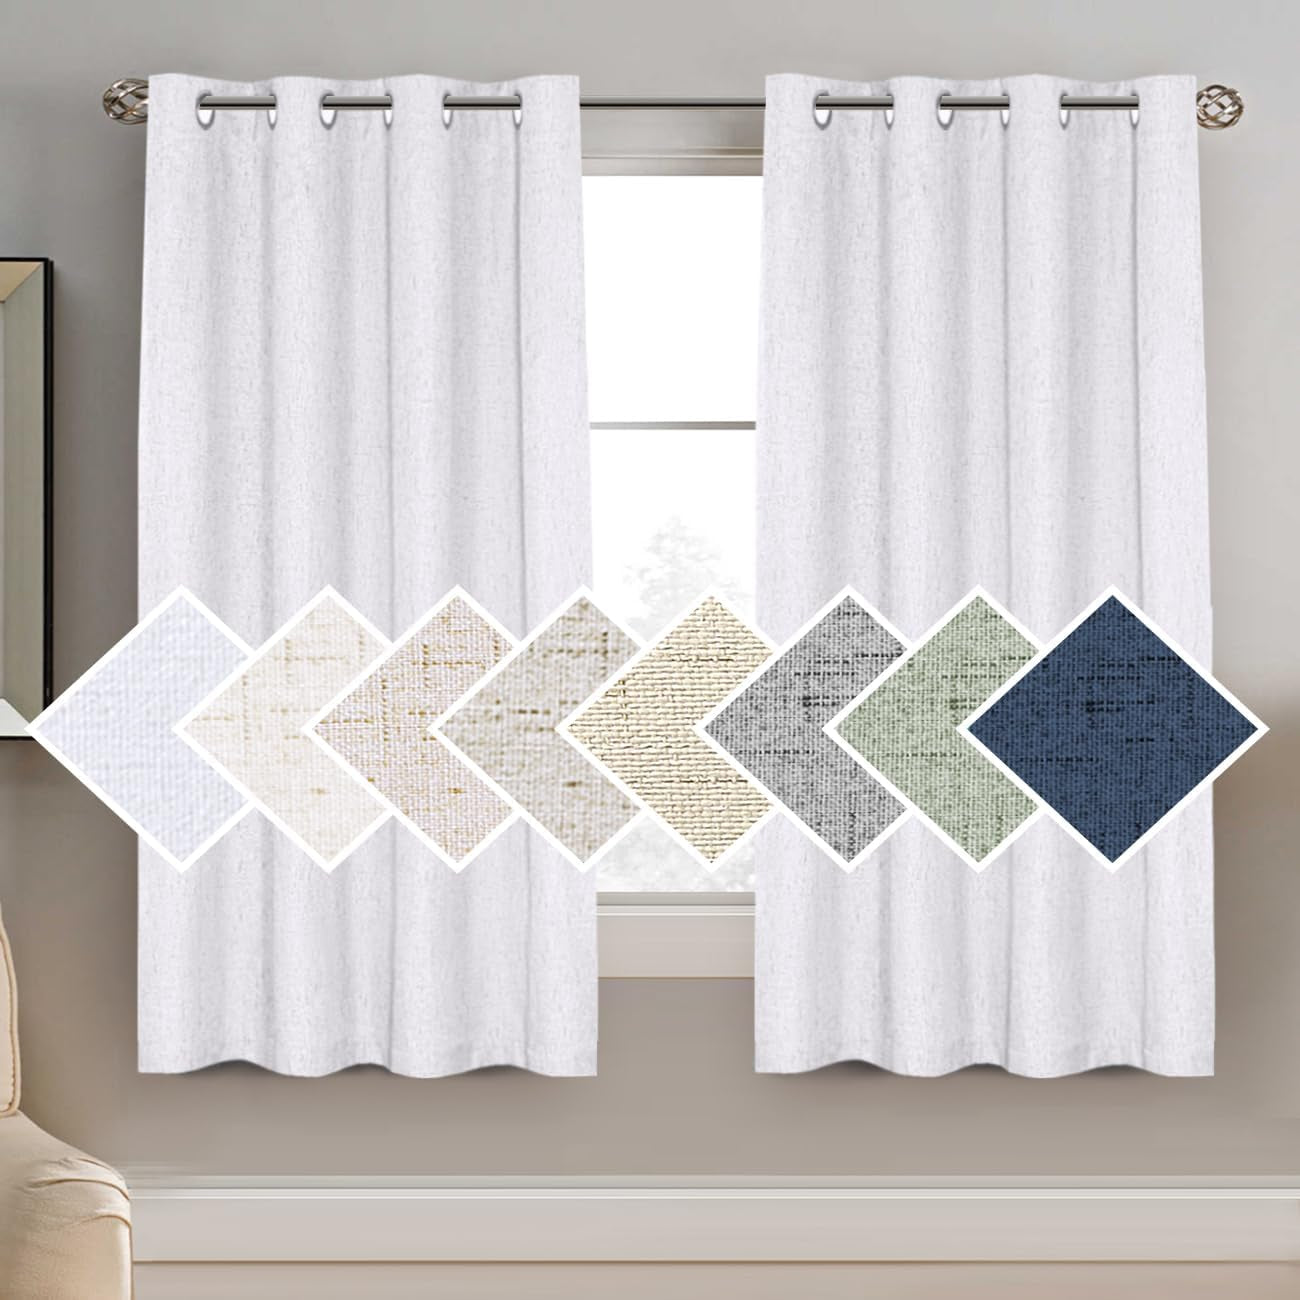 H.VERSAILTEX 100% Blackout Curtains for Bedroom Thermal Insulated Linen Textured Curtains Heat and Full Light Blocking Drapes Living Room Curtains 2 Panel Sets, 52X84 - Inch, Natural  H.VERSAILTEX Pure White 1 Panel - 52"W X 63"L 